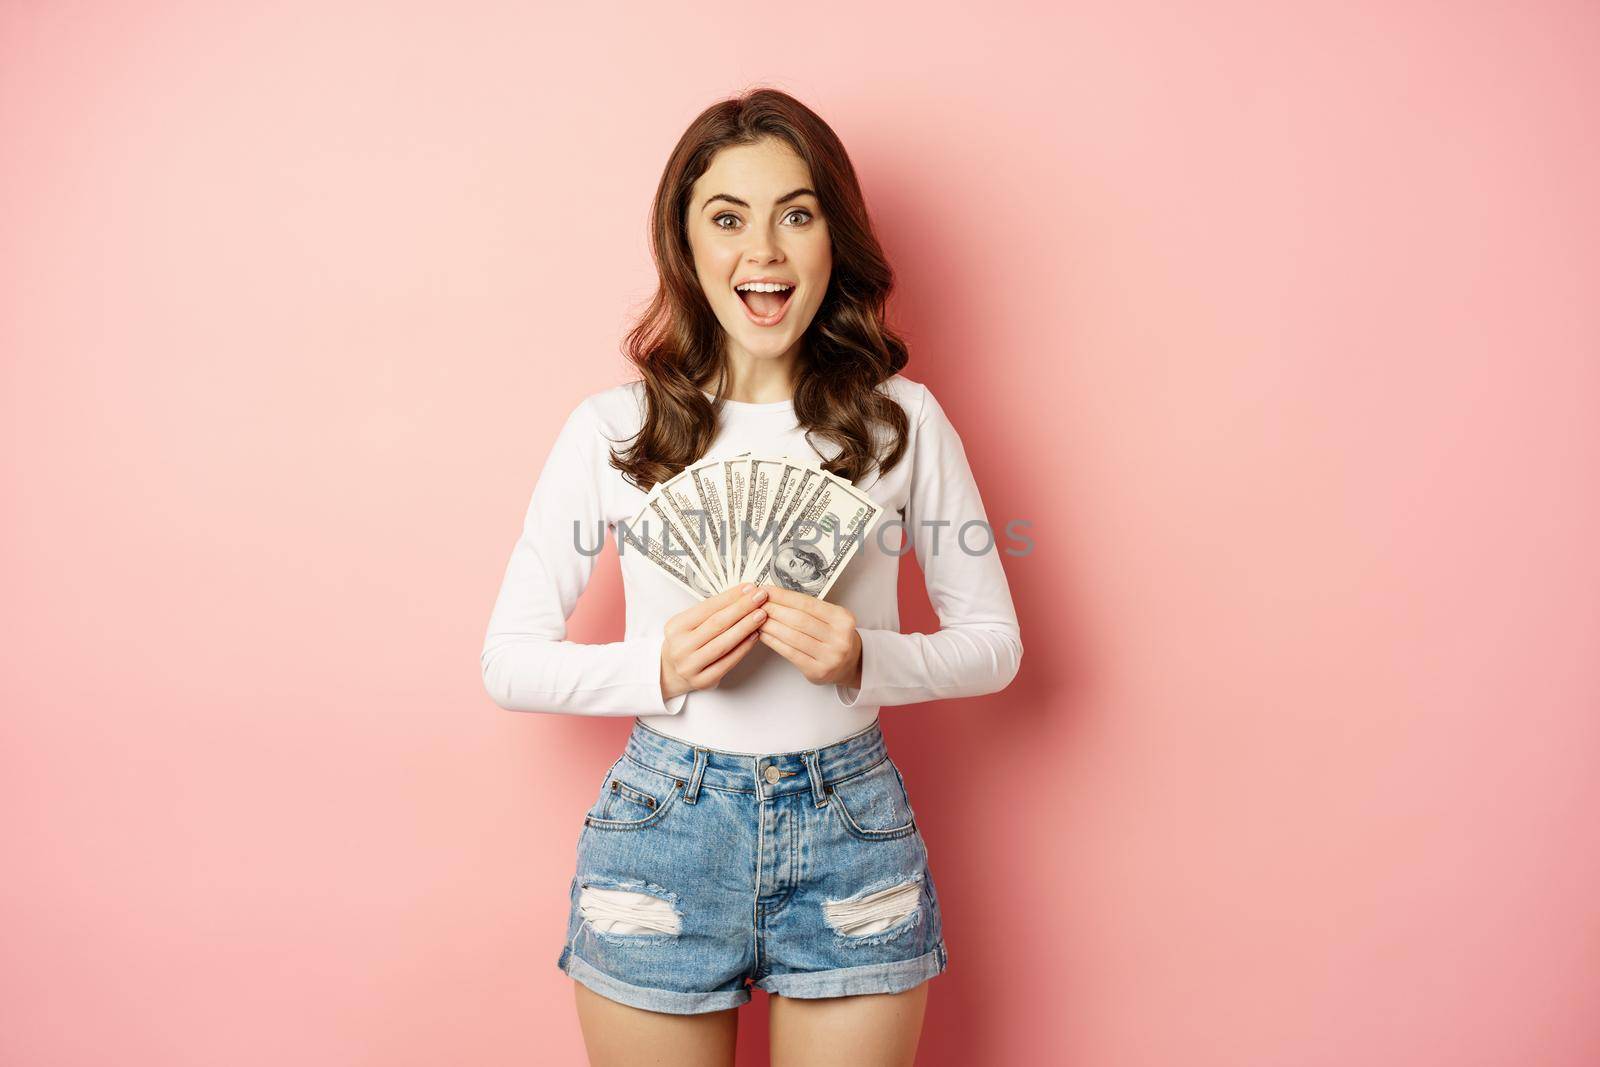 Loans and microcredit. Smiling beautiful girl showing money, cash in hands and looking enthusiastic, standing over pink background.